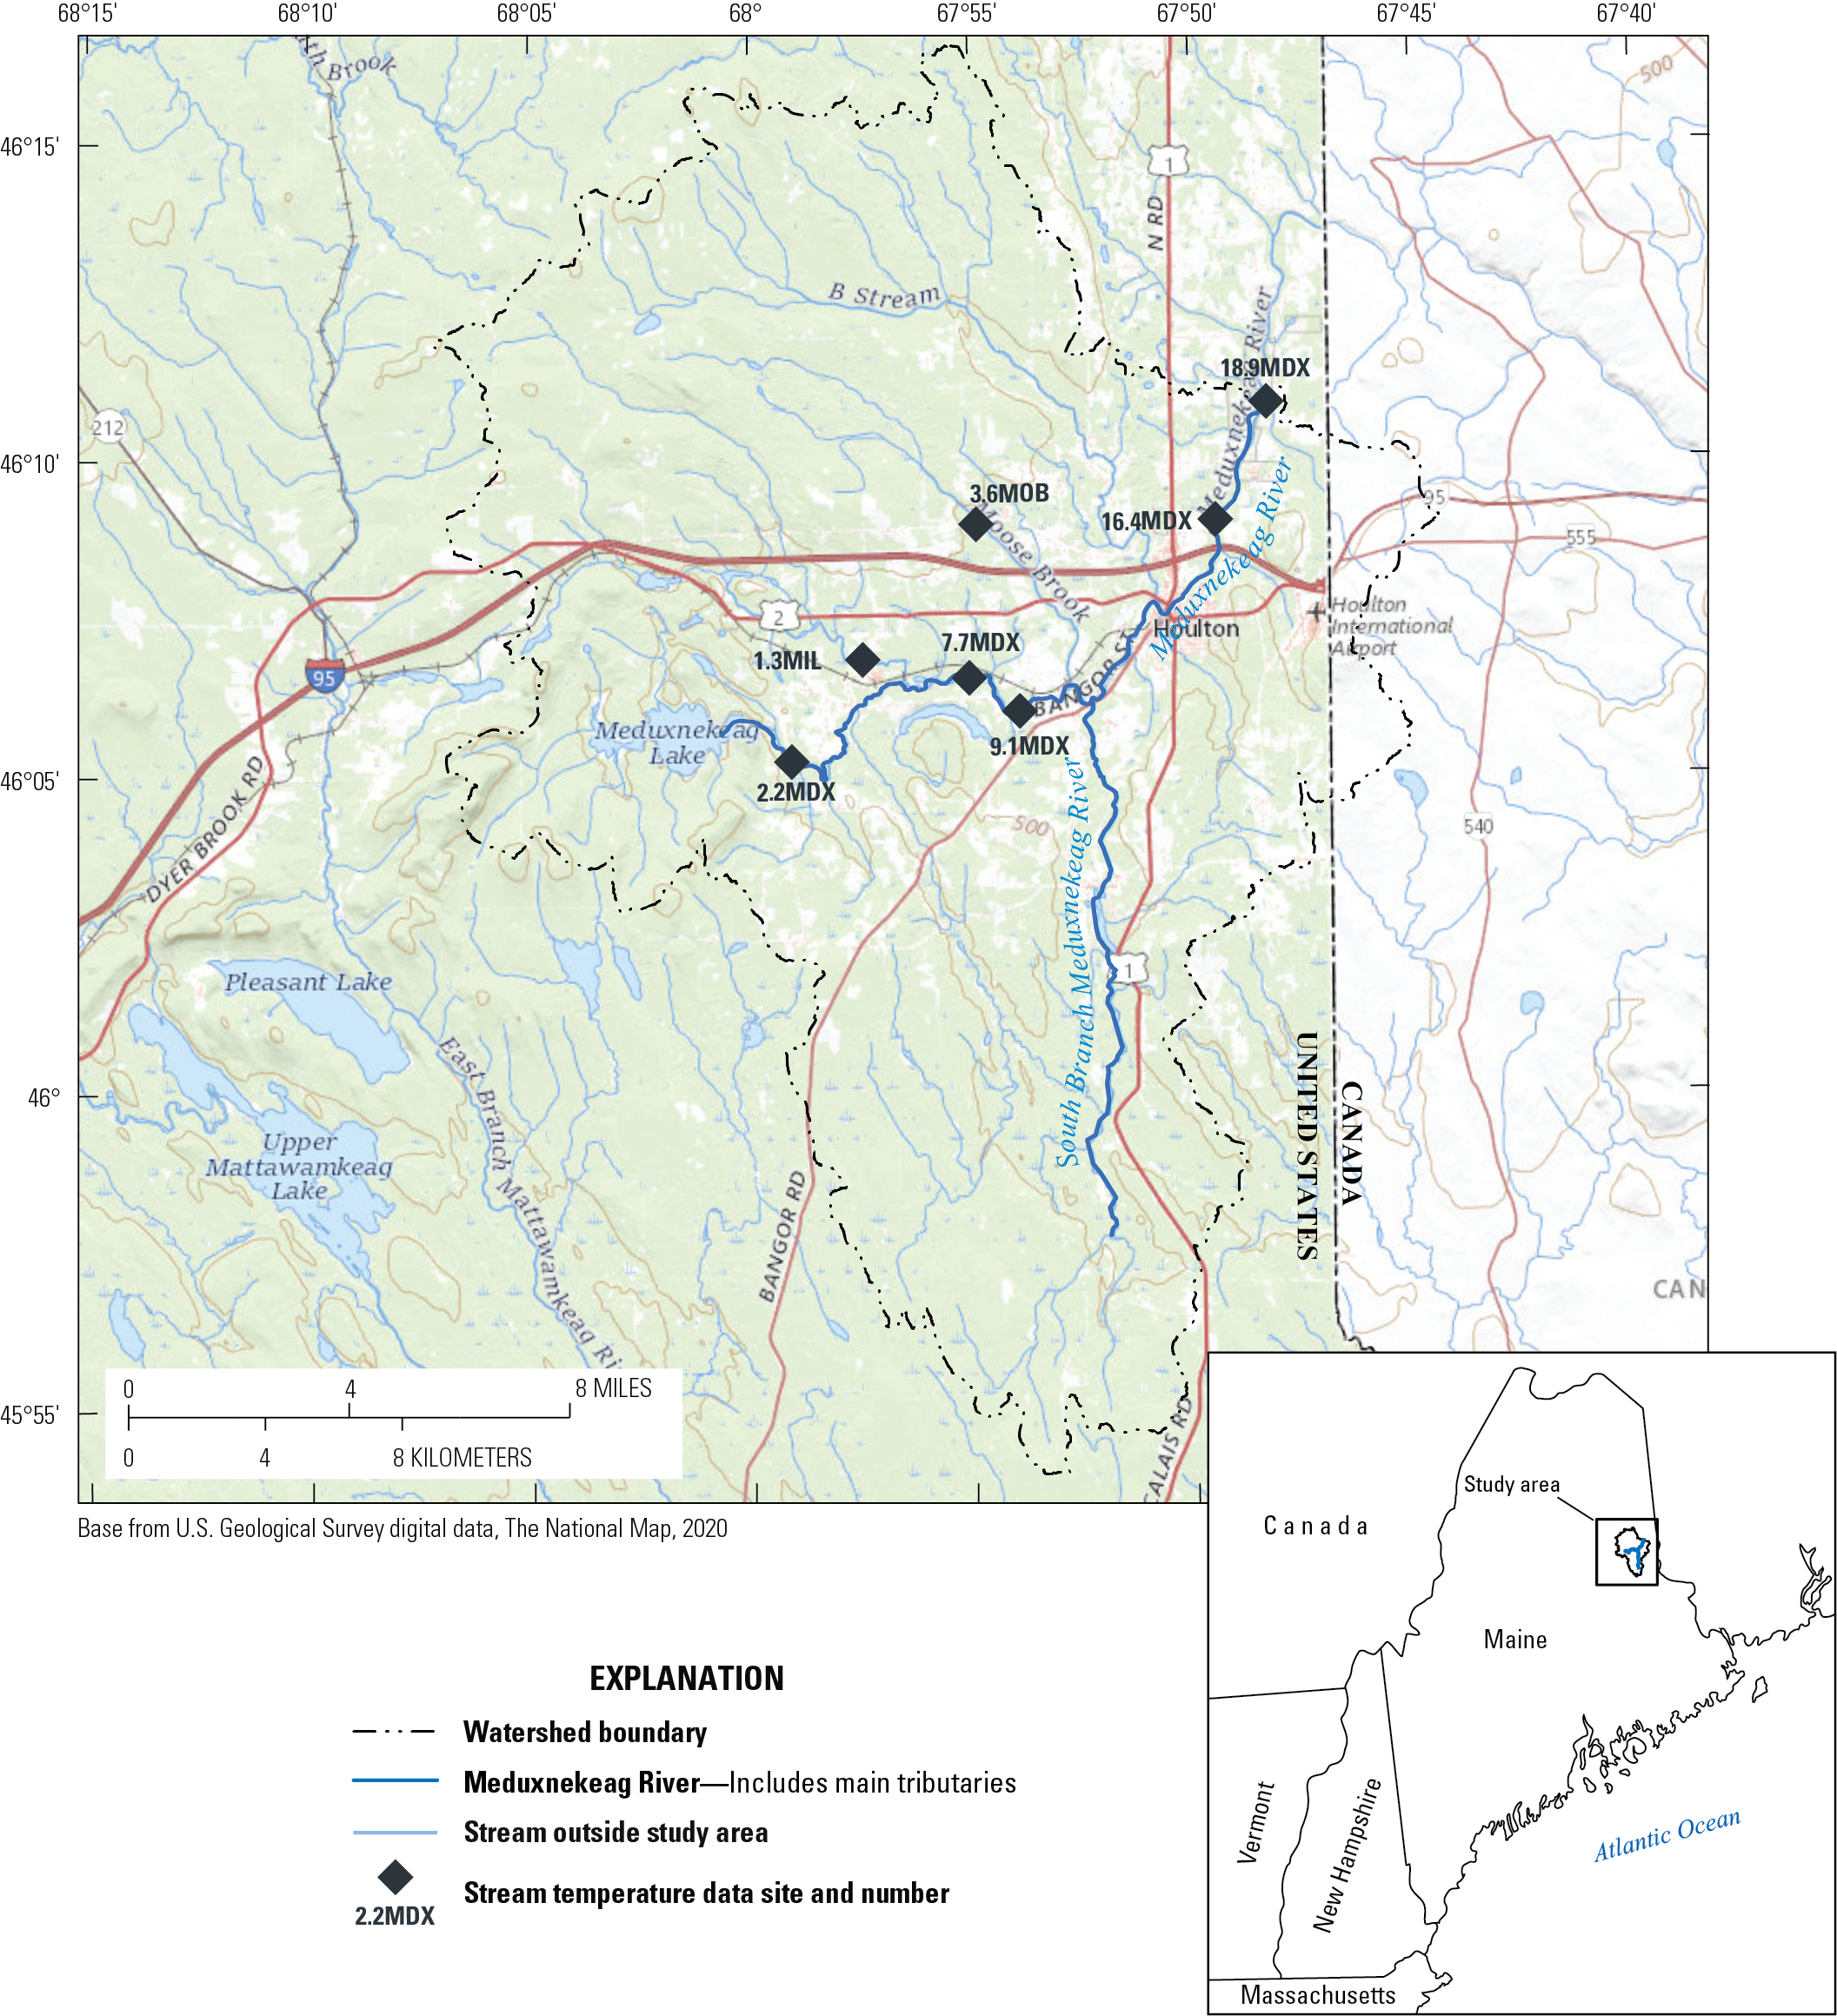 Diamonds show stream temperature data collection sites in the Meduxnekeag River watershed,
                           Maine.